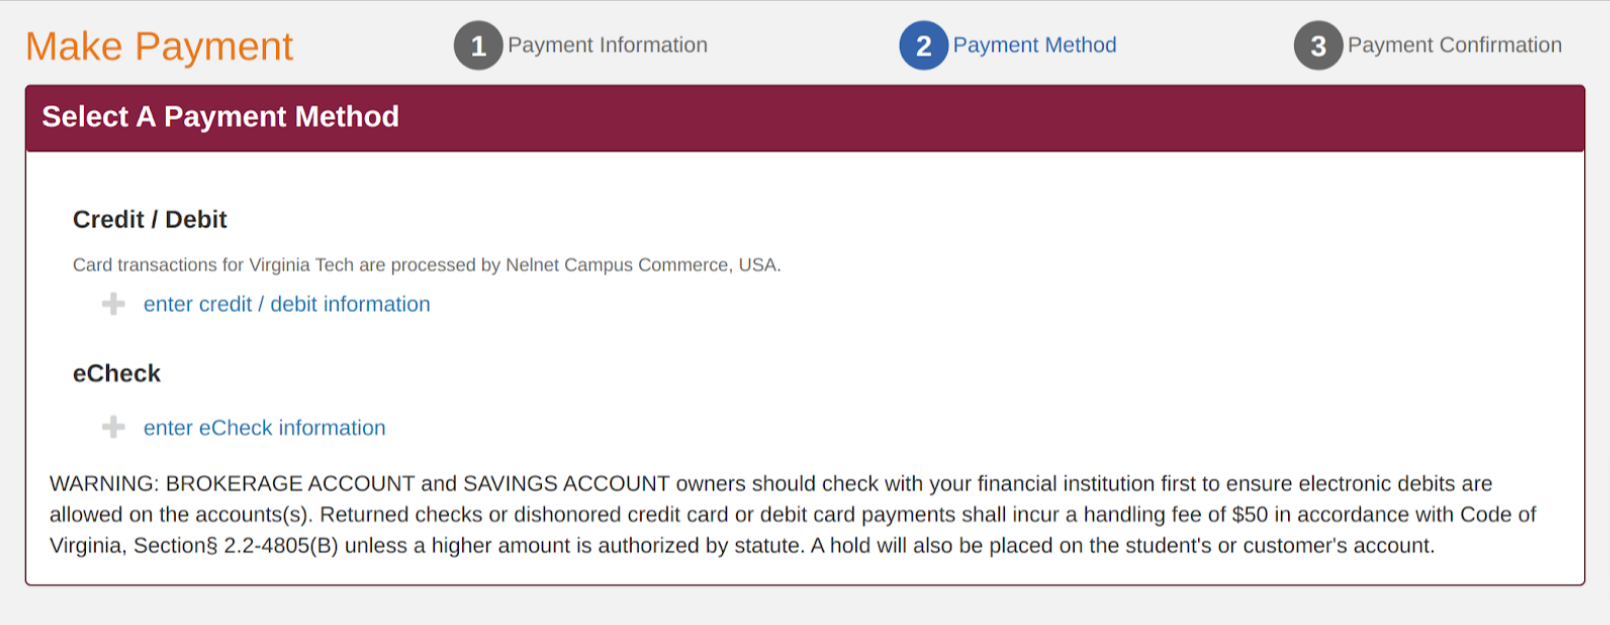 "Select A Payment Method" window that allows the options of paying by Credit/Debit or by eCheck